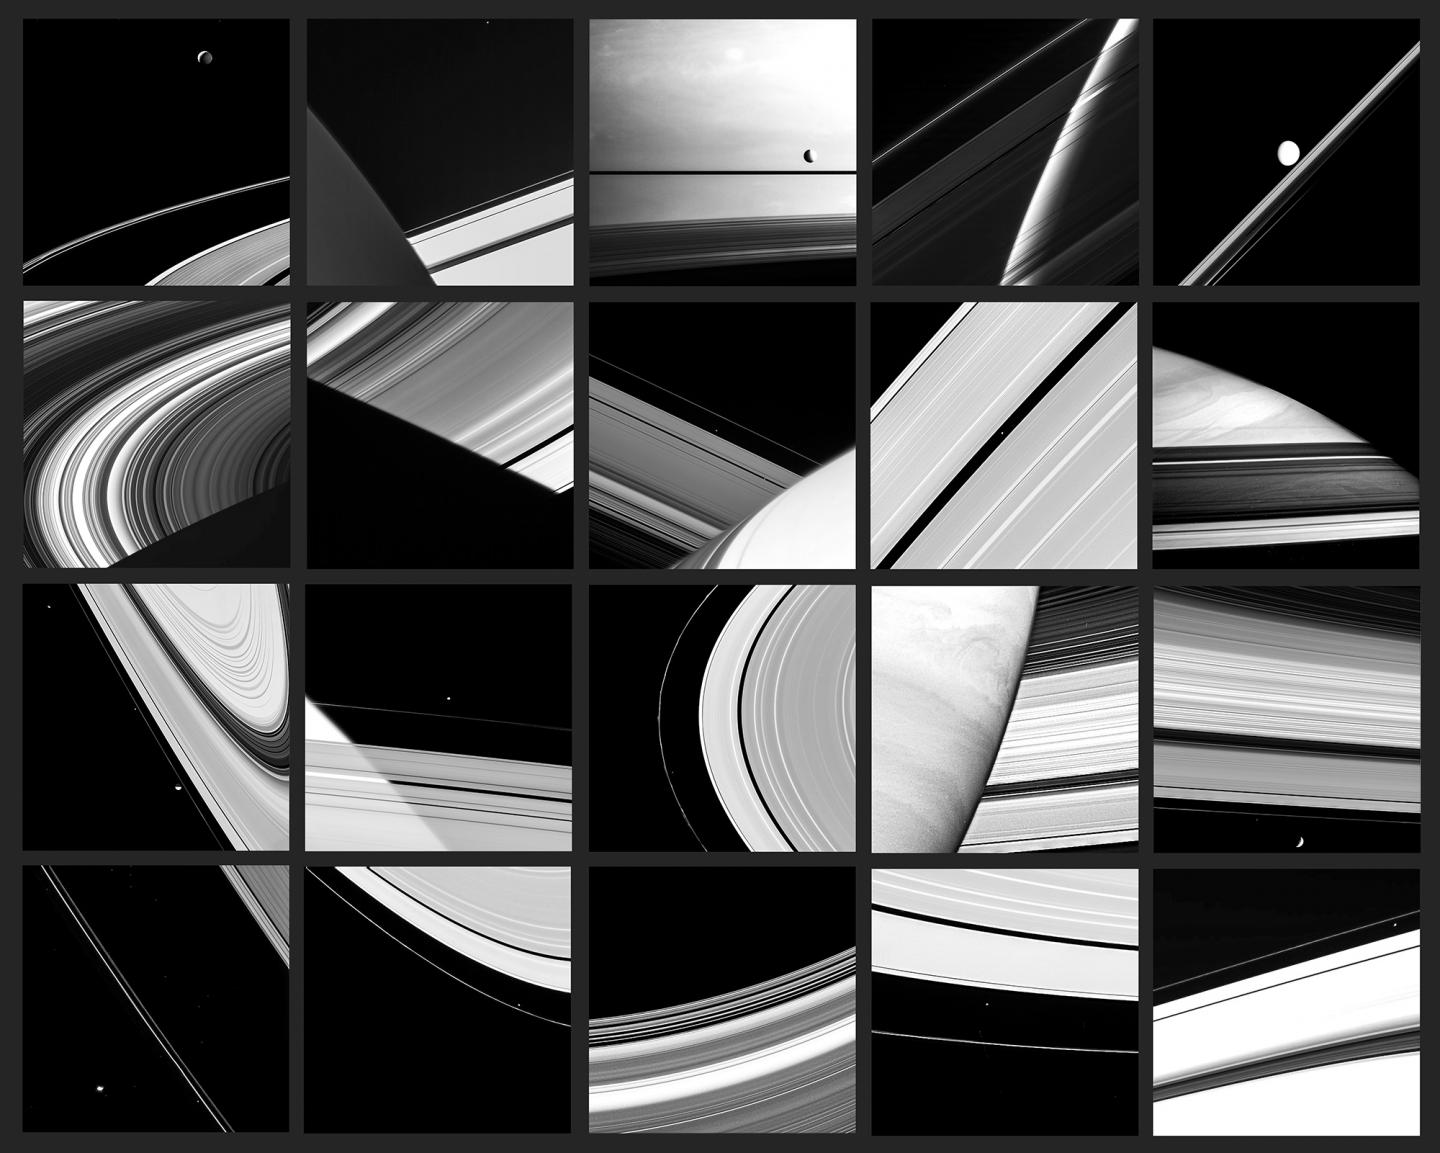 An abstract, black and white astronomy photograph, showing a grid of fractured images adapted from satellite data